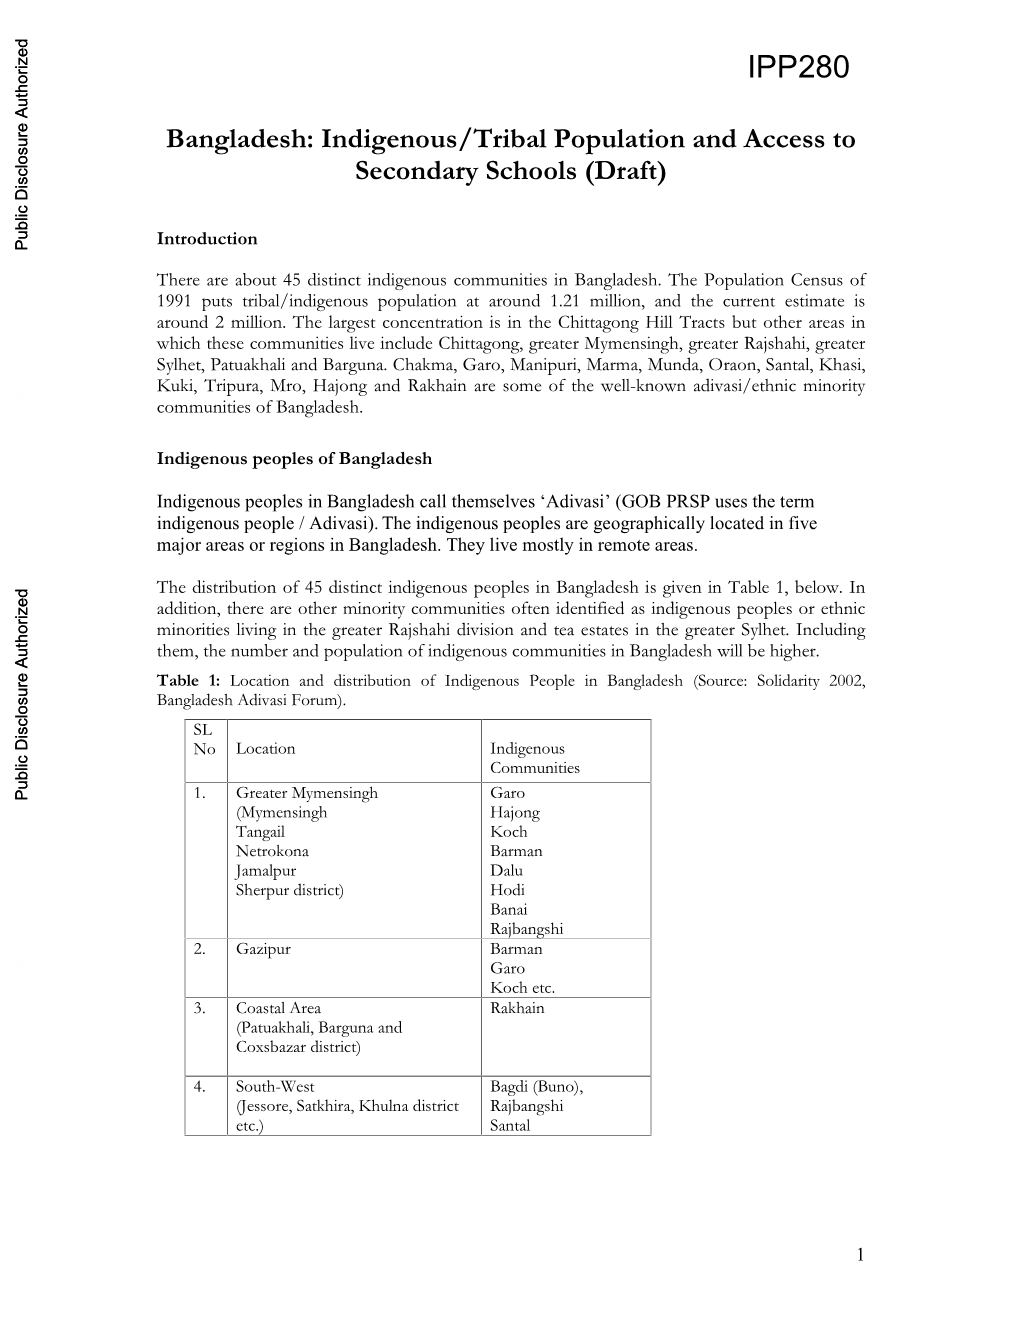 Indigenous/Tribal Population and Access to Secondary Schools (Draft)